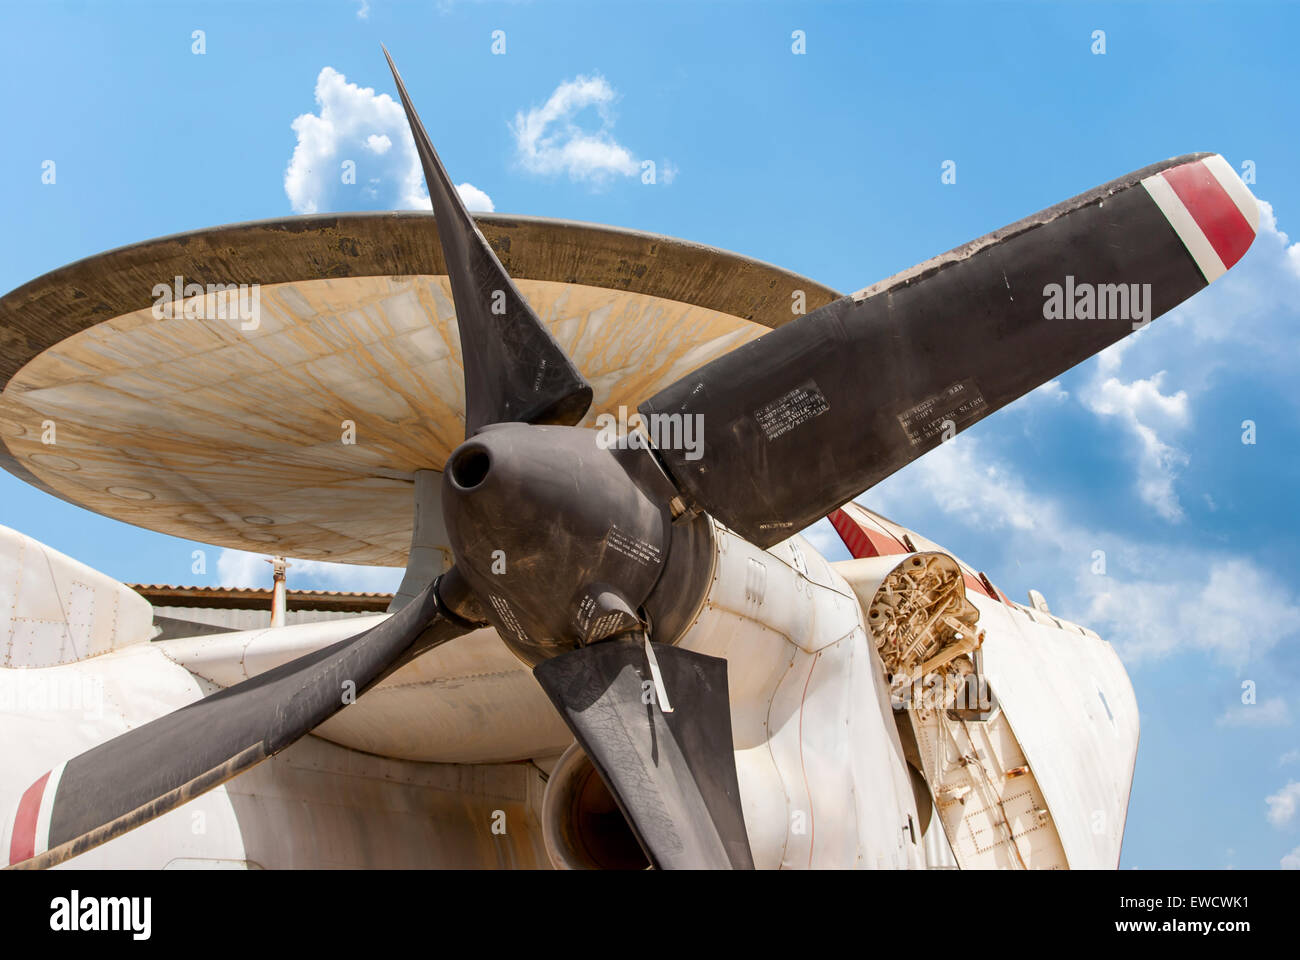 HATZERIM, ISRAEL - APRIL 27, 2015: Northrop Grumman E-2 Hawkeye is an American all-weather, carrier-capable tactical airborne ea Stock Photo